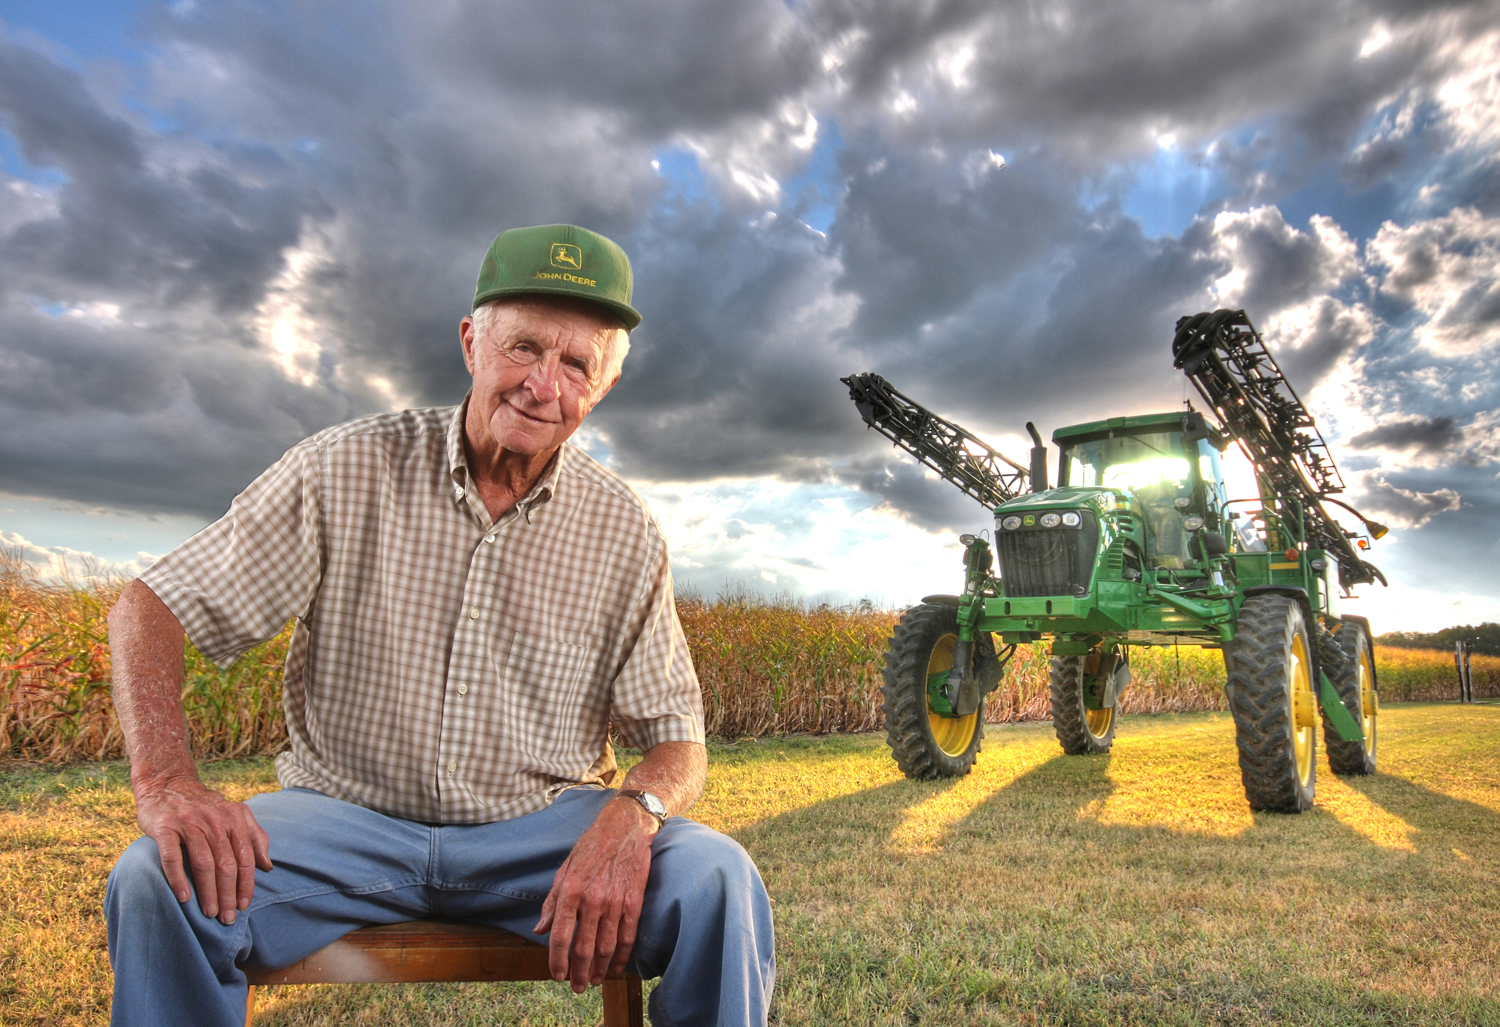 Bruce Crippen, Jerry Shaw John Deere Tractor, 2010. Color photograph, 11 x 14 inches. Courtesy of the artist